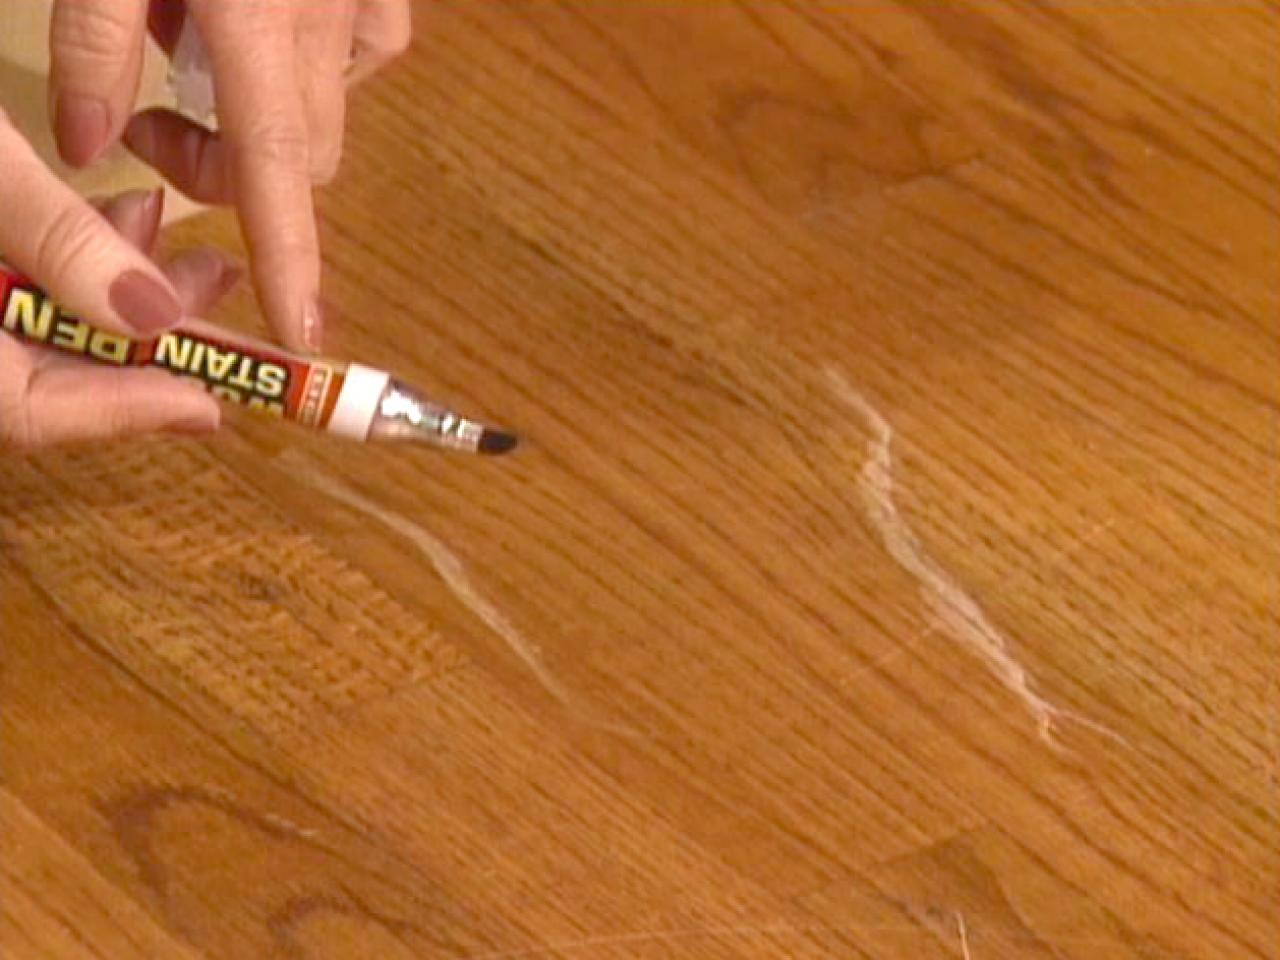 How To Touch Up Wood Floors Tos Diy, Best Hardwood Floor Polish Remover